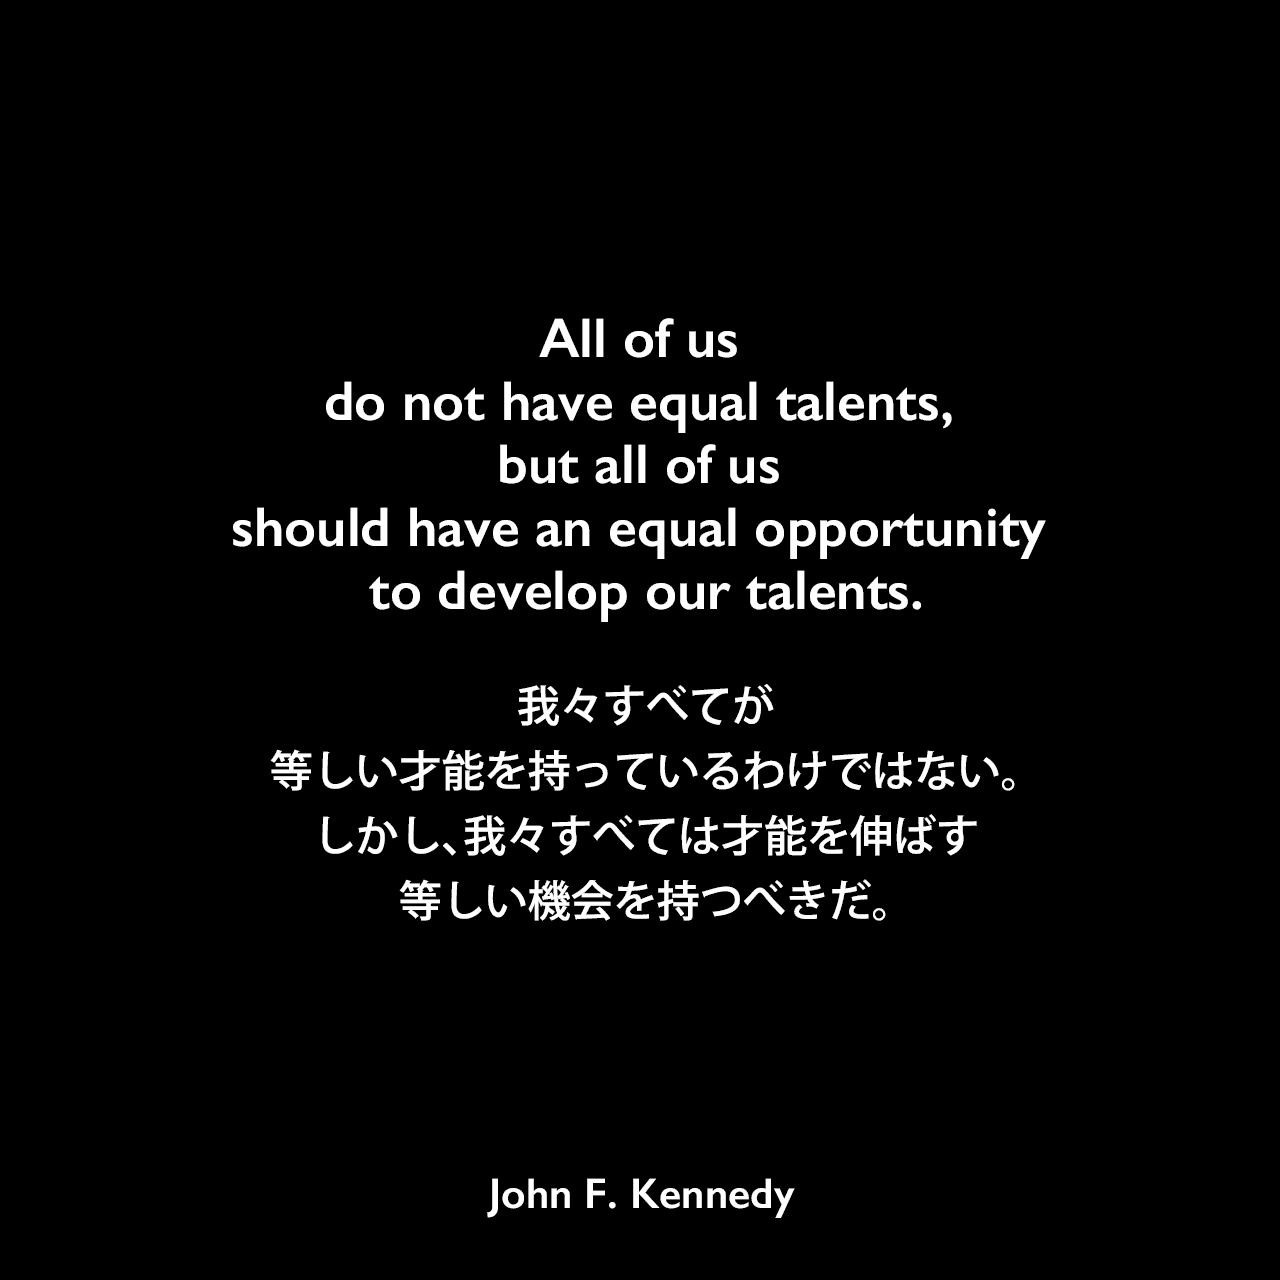 All of us do not have equal talents, but all of us should have an equal opportunity to develop our talents.我々すべてが等しい才能を持っているわけではない。しかし、我々すべては才能を伸ばす等しい機会を持つべきだ。John F Kennedy